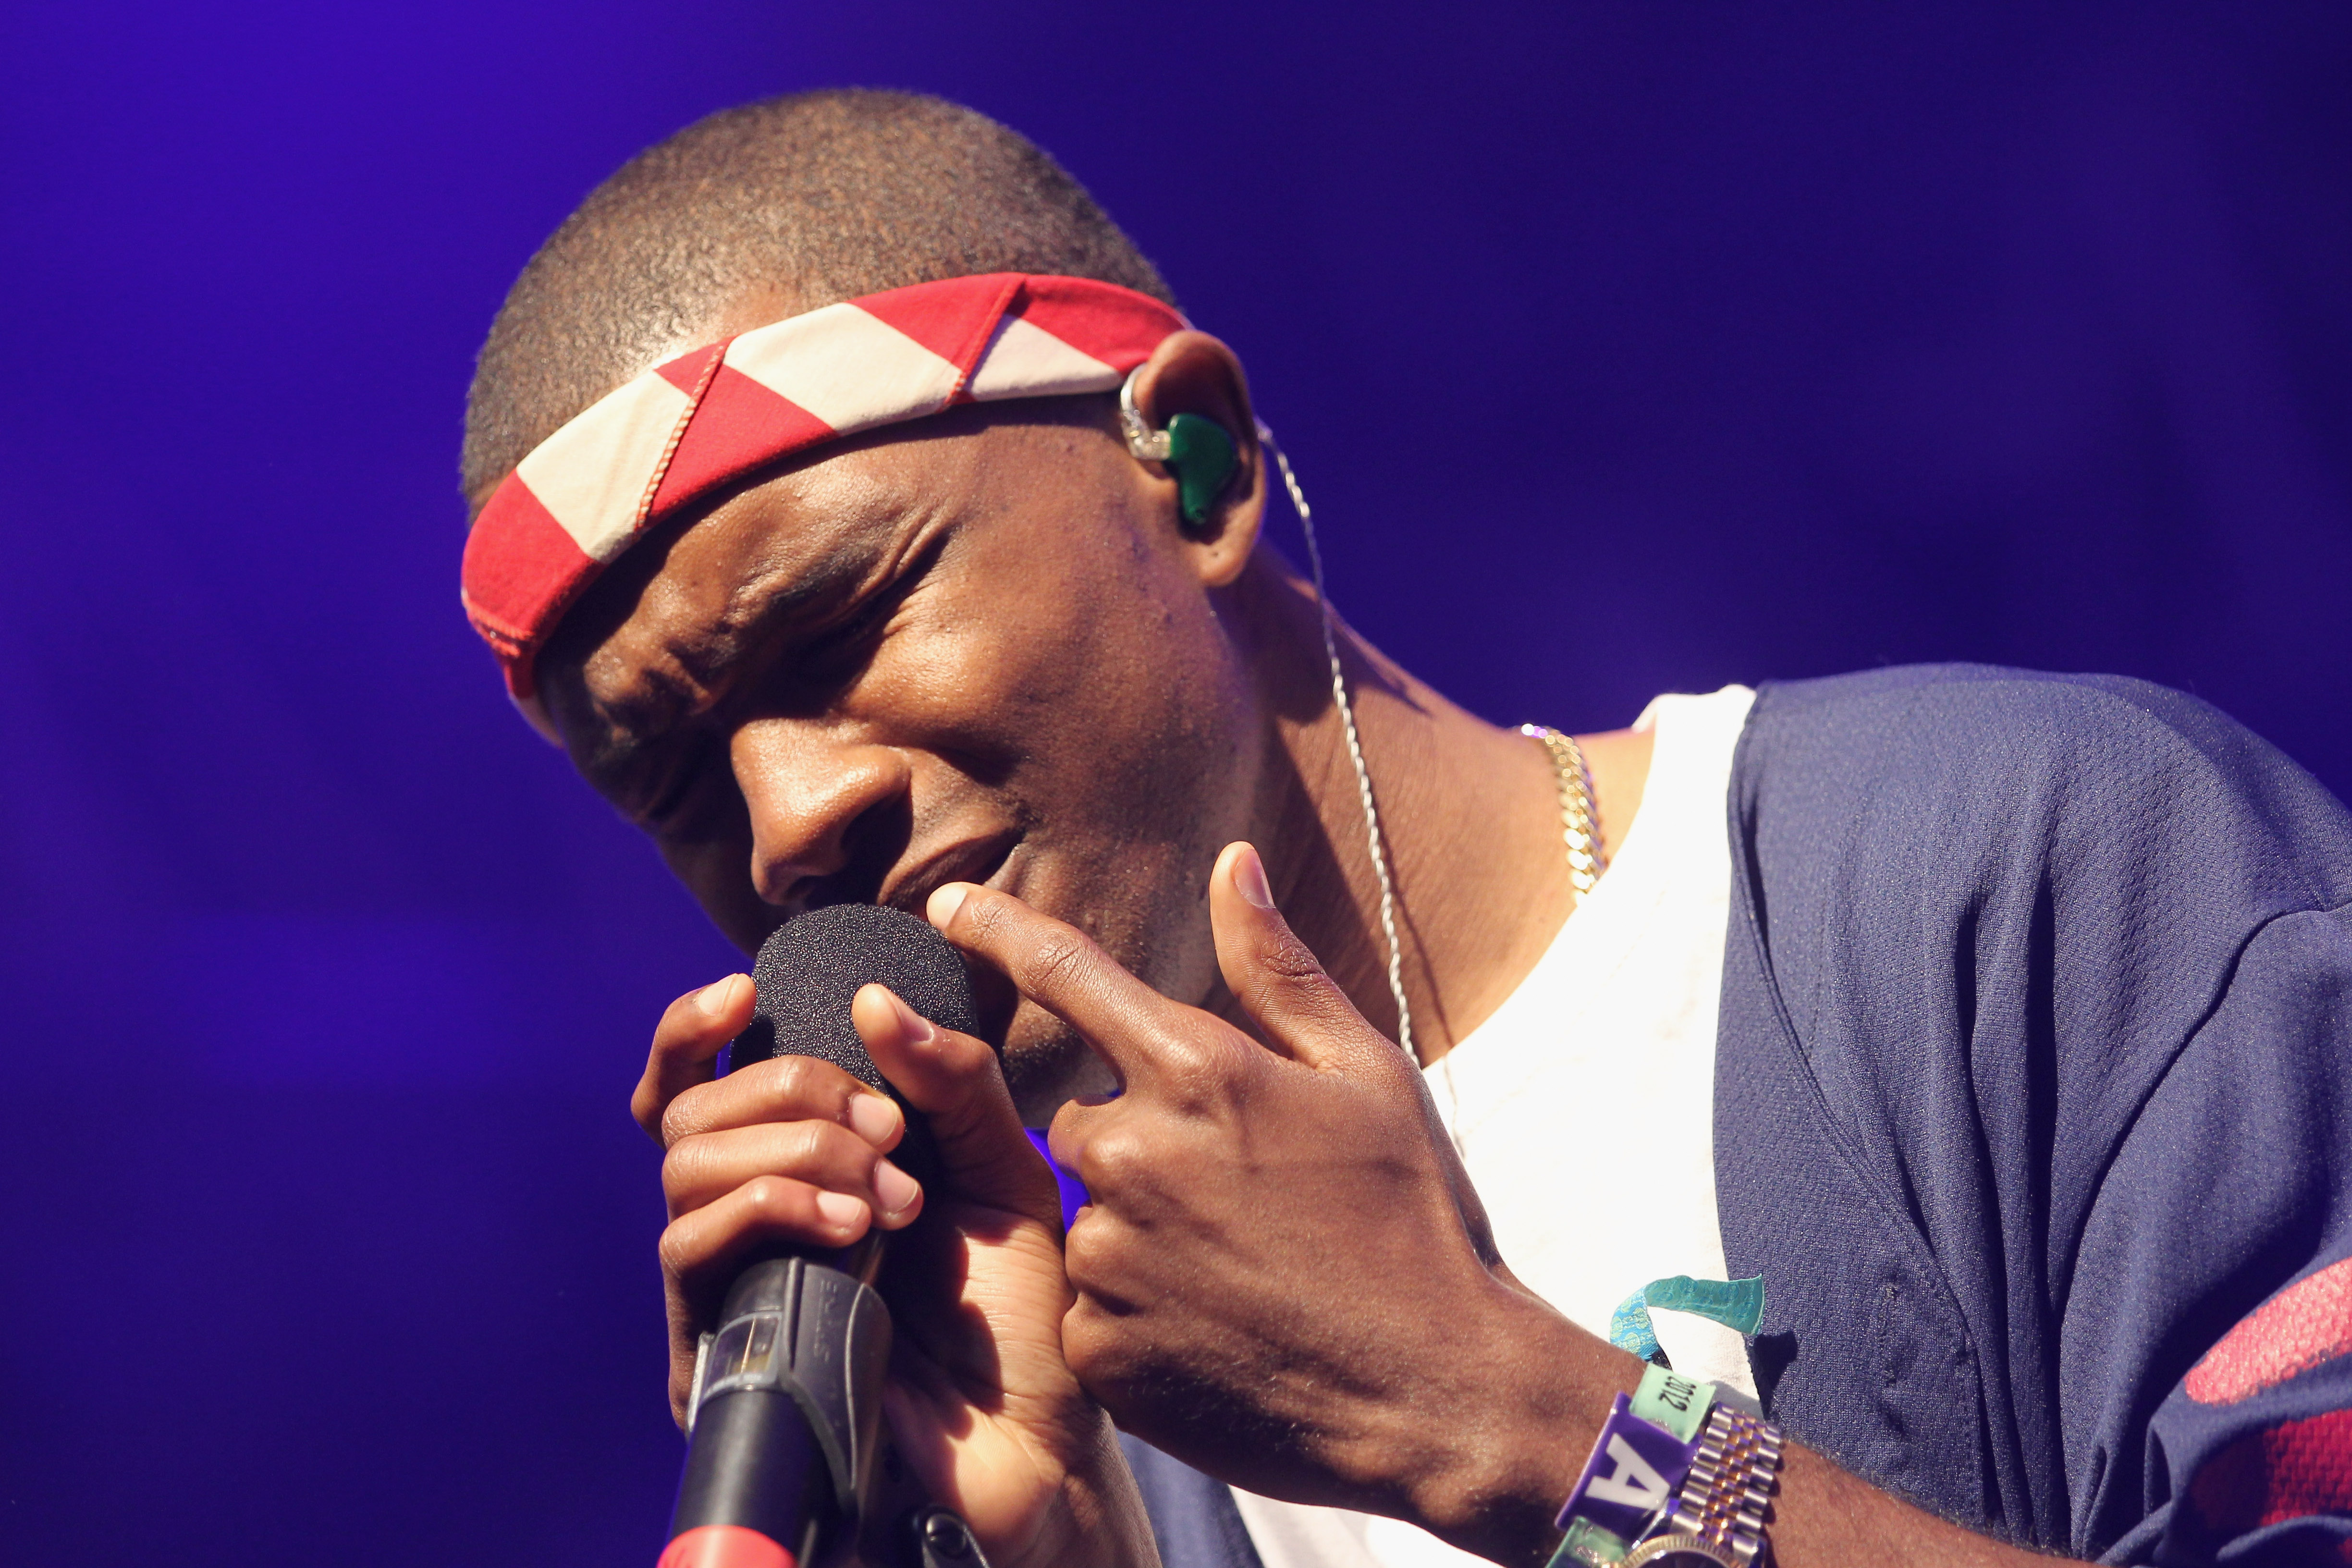 Frank Ocean Teases Intimate Cover Of SZA’s “The Weekend”